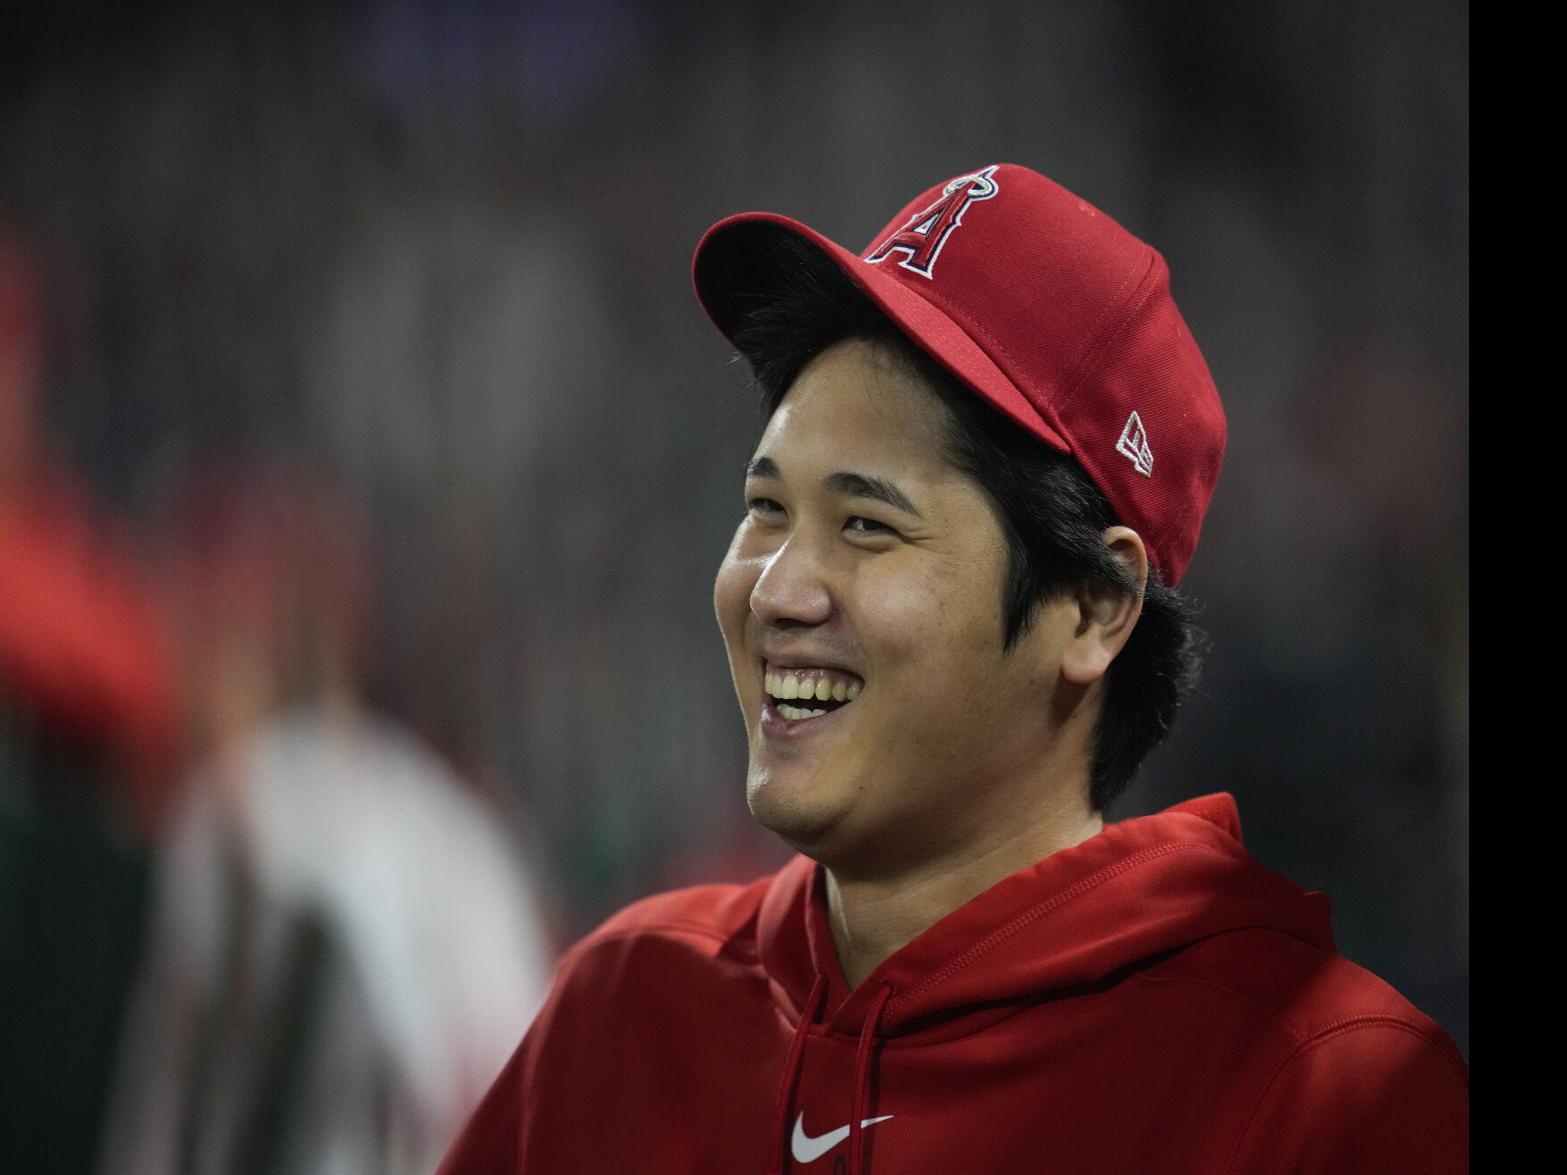 Shohei Ohtani won't pitch until 2025 after undergoing surgery 